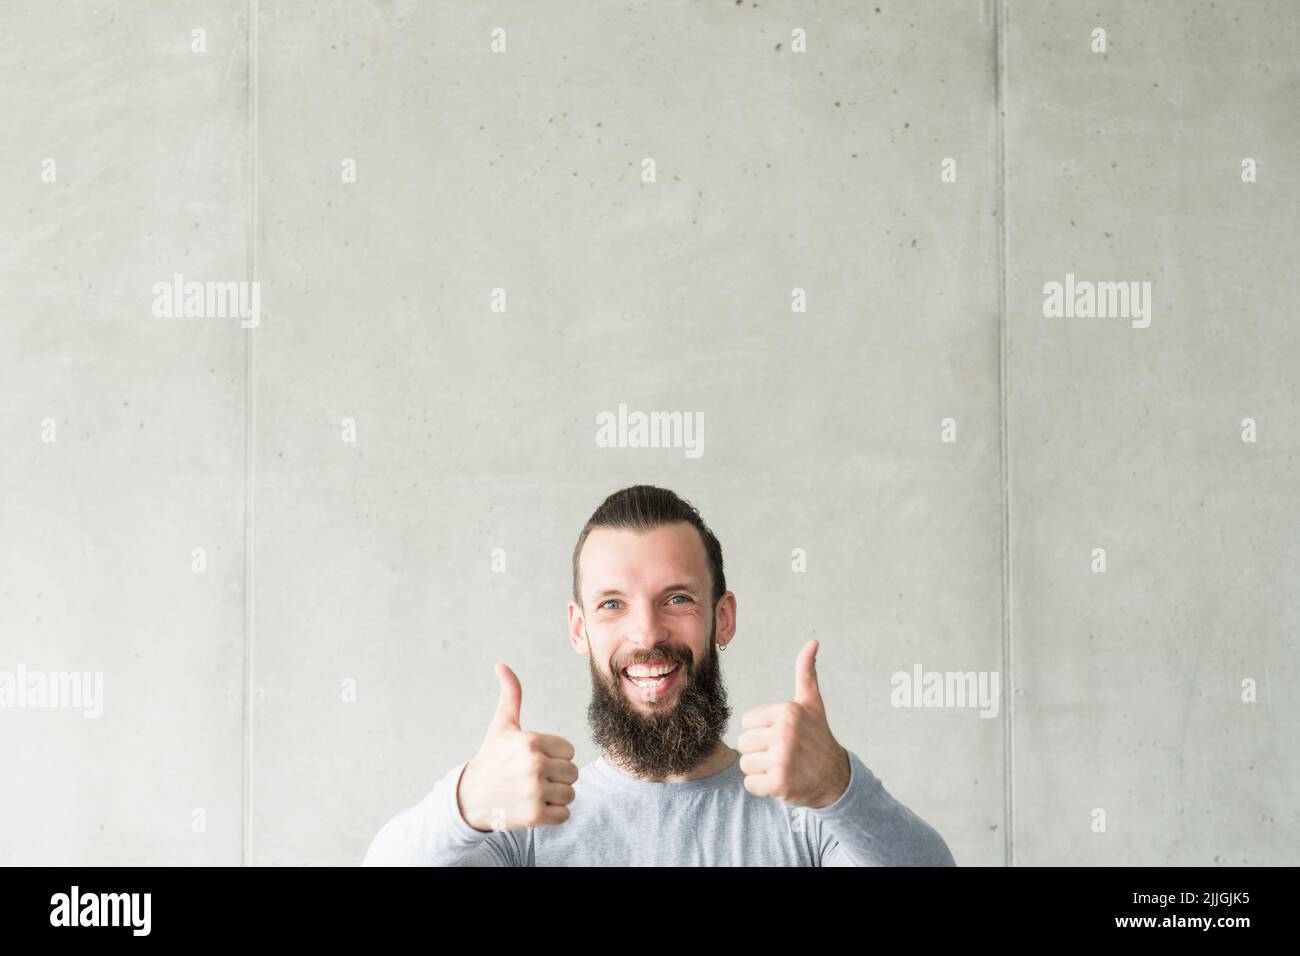 approve agree happy bearded hipster guy thumbs up Stock Photo